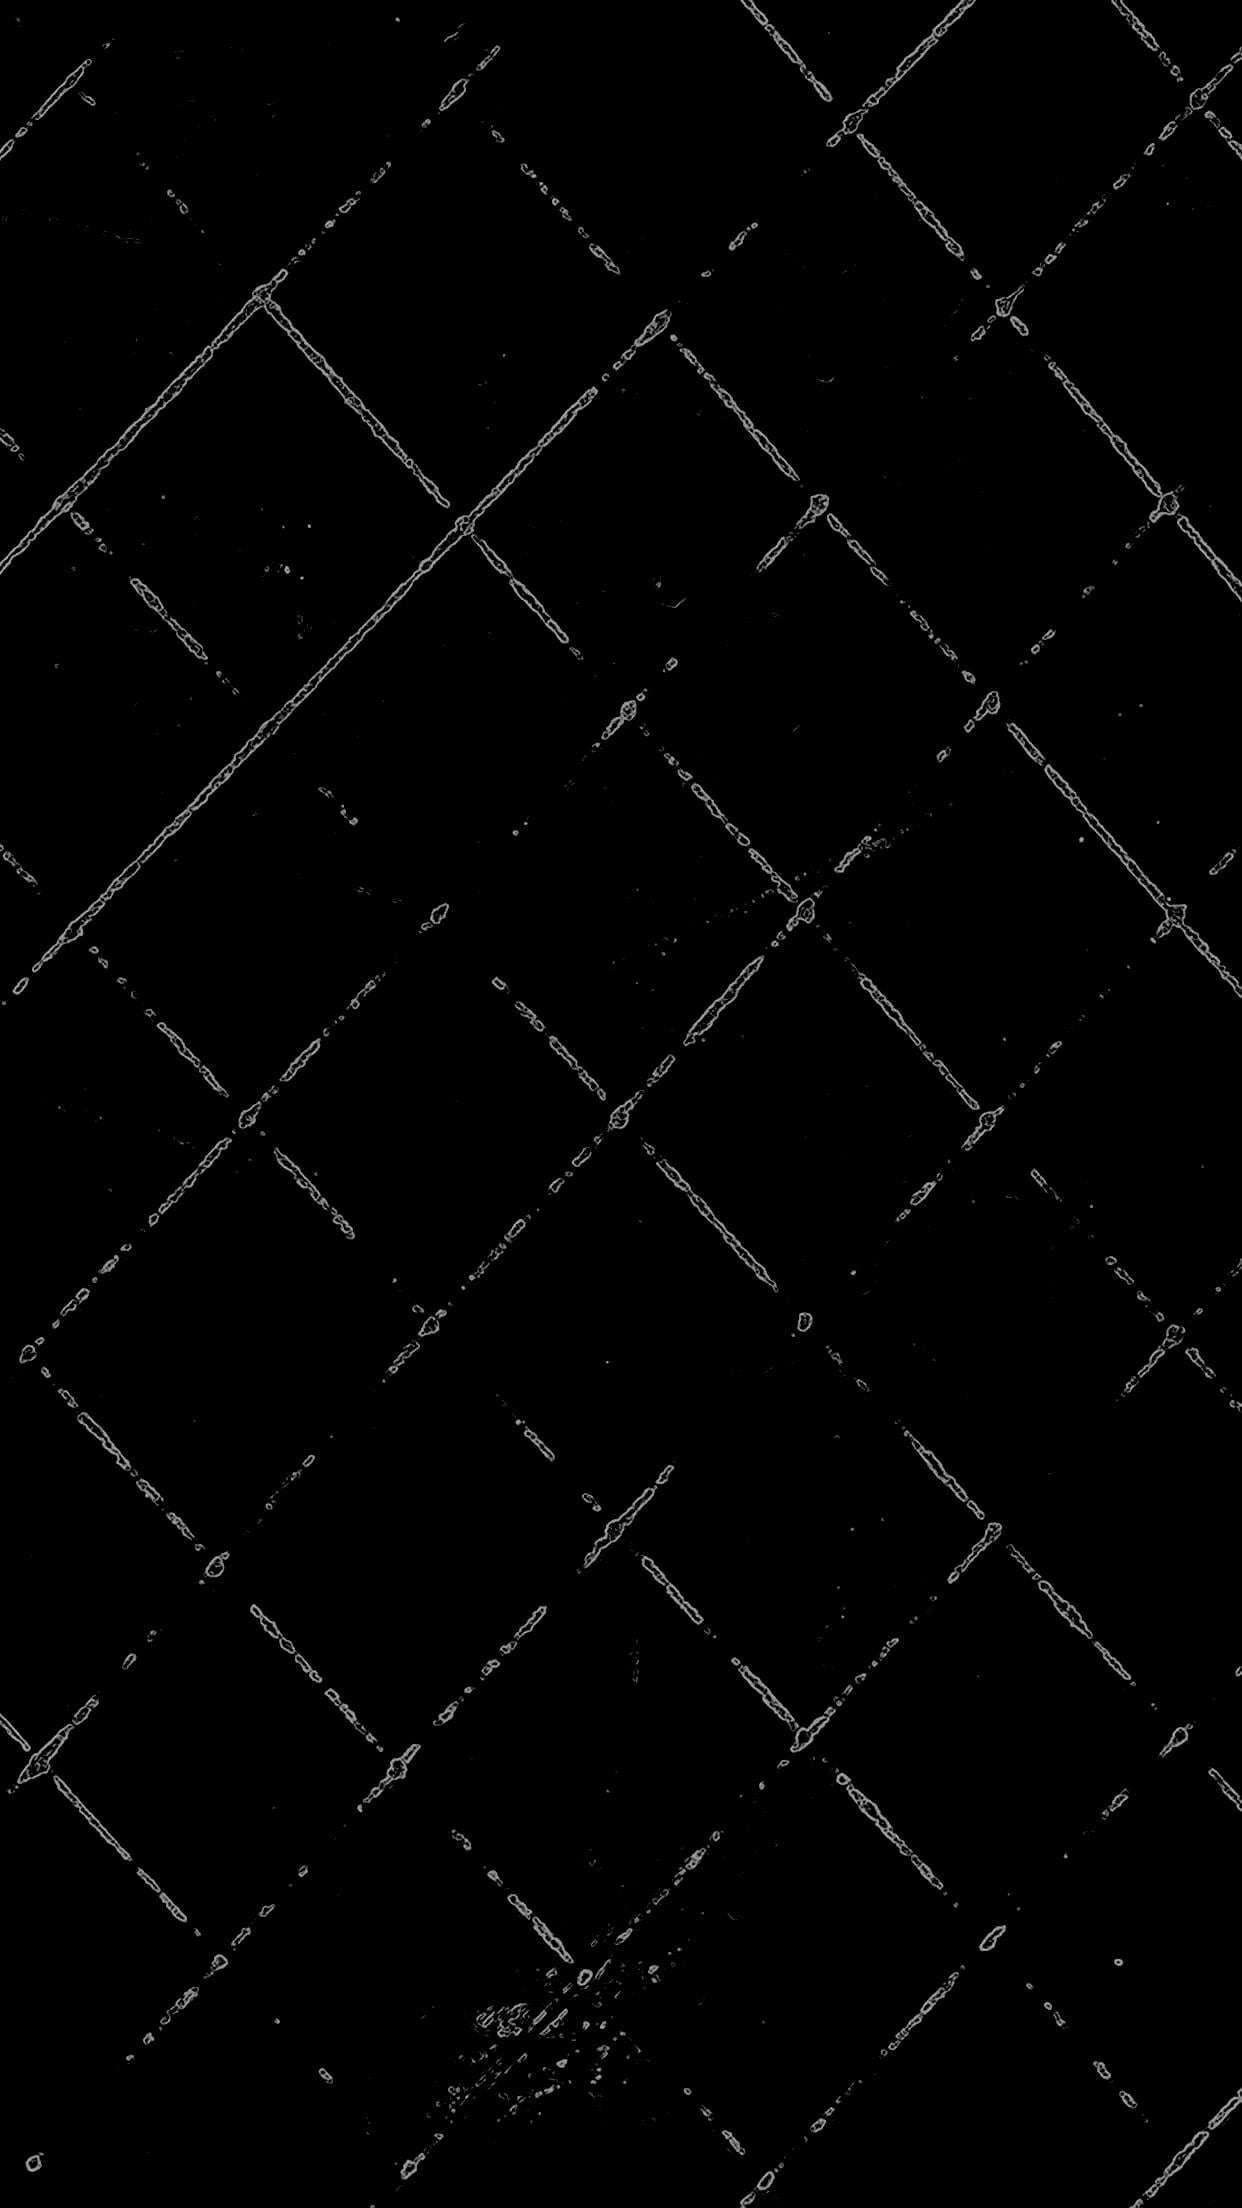 abstract, portrait display, fence, pattern, backgrounds, full frame